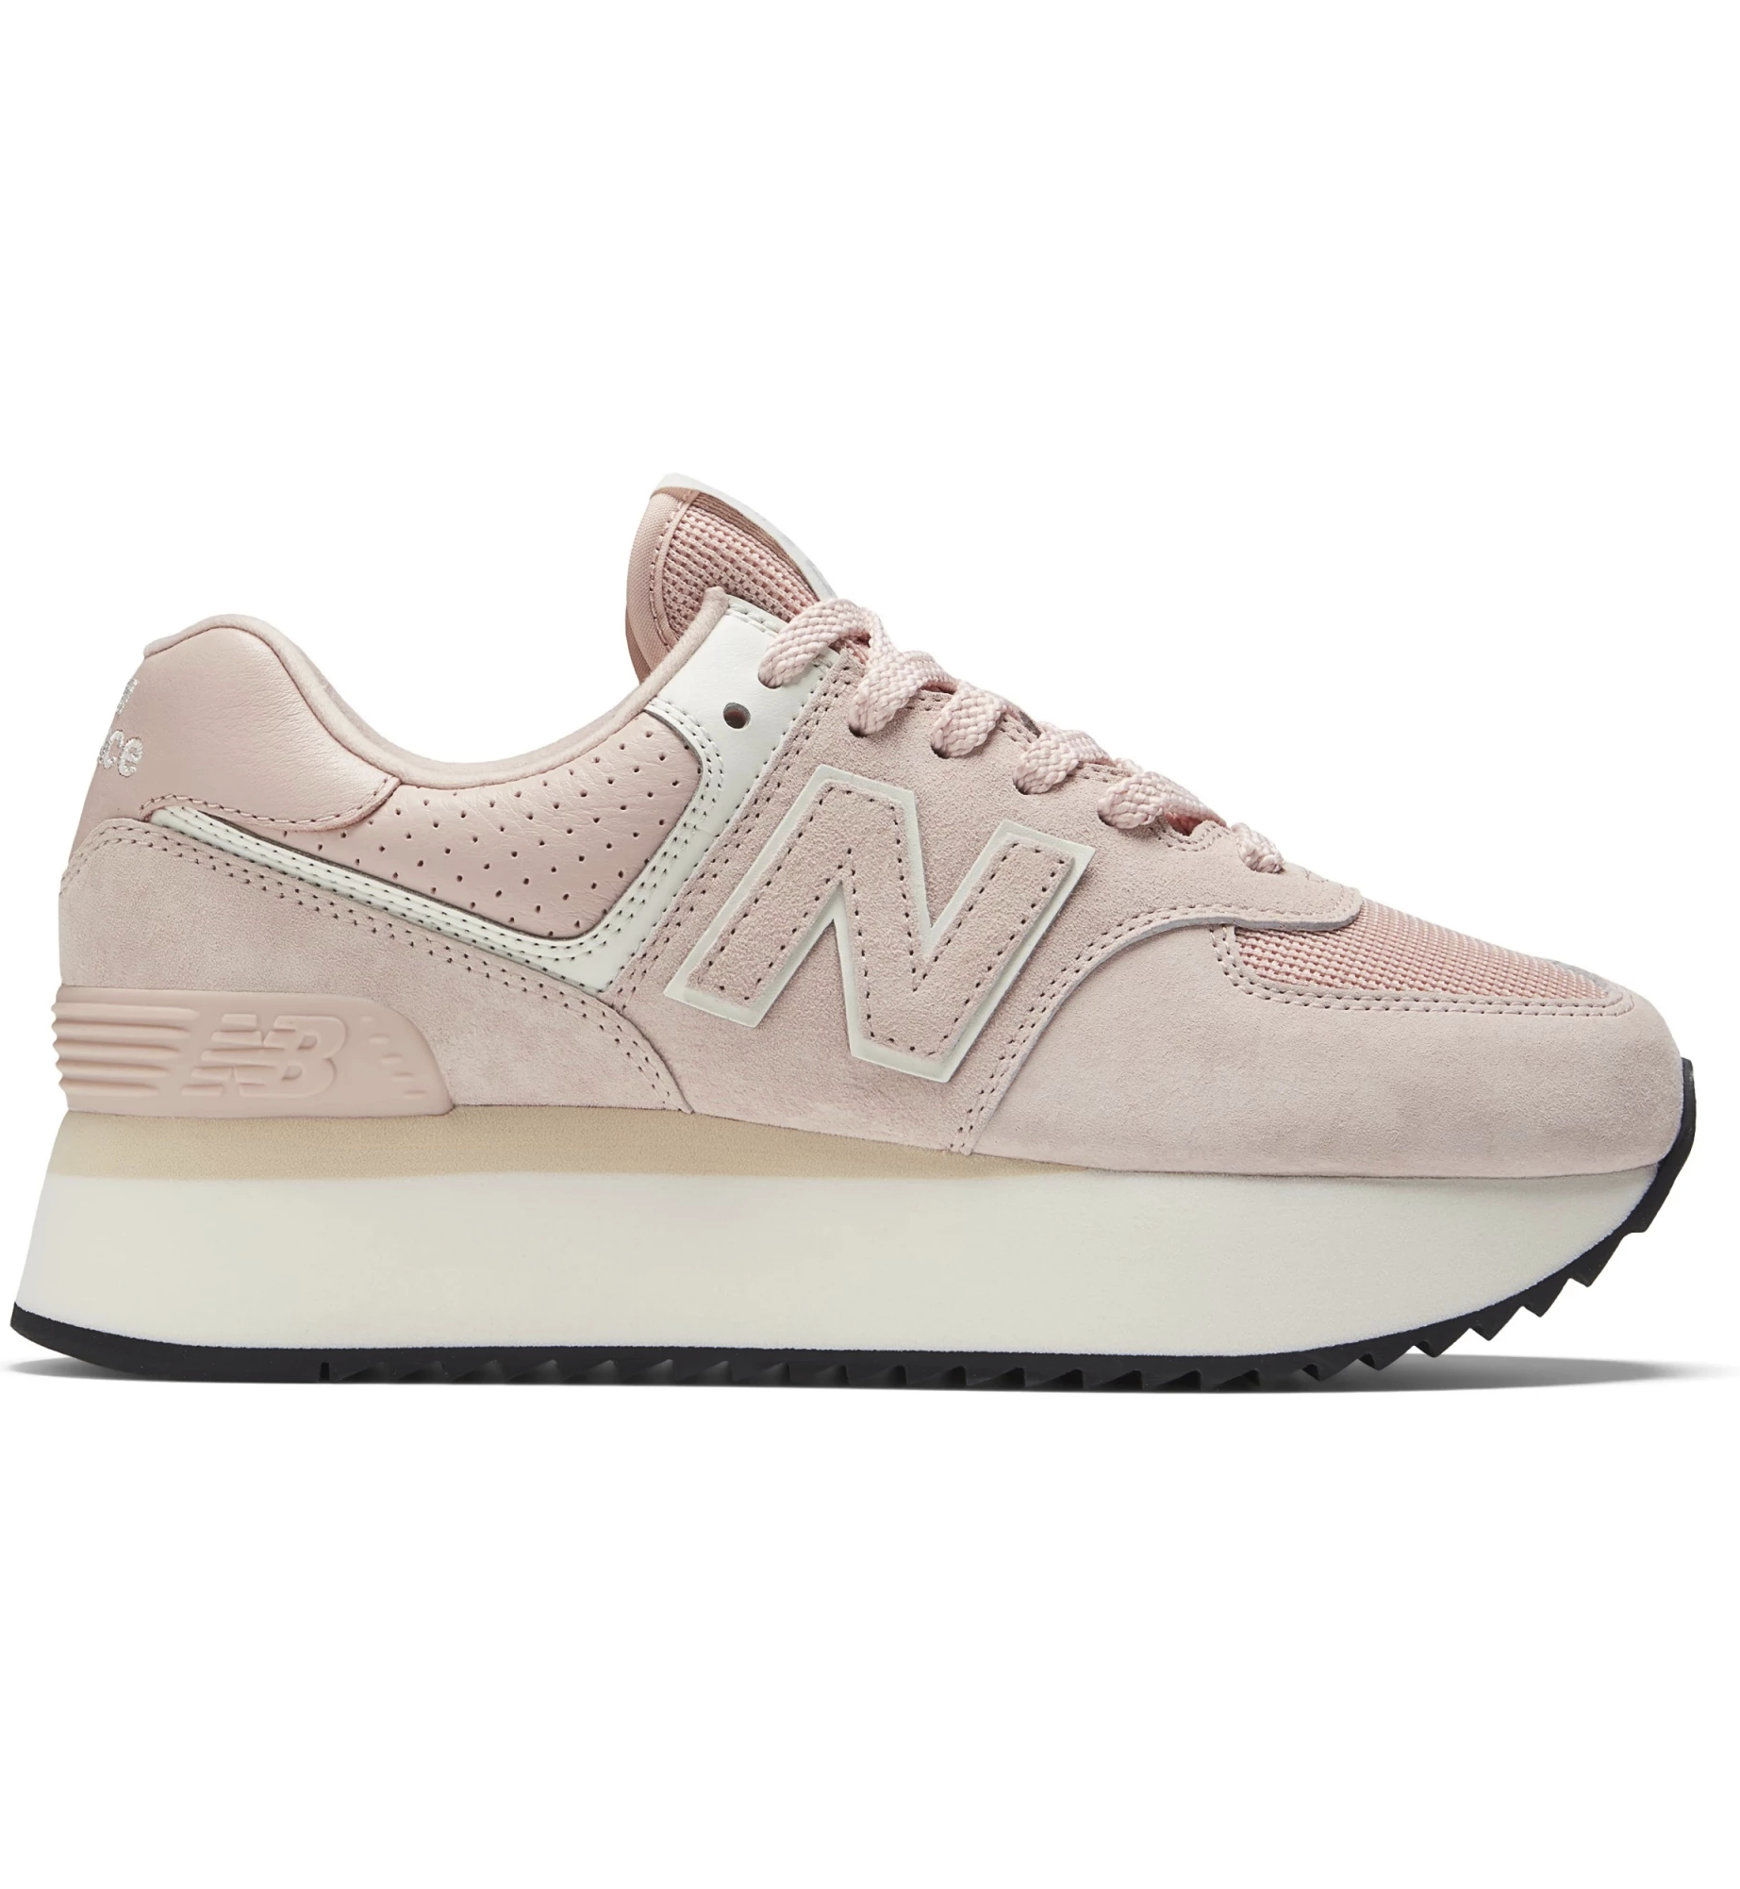 New Balance WL574 Stacked Sneakers Damen